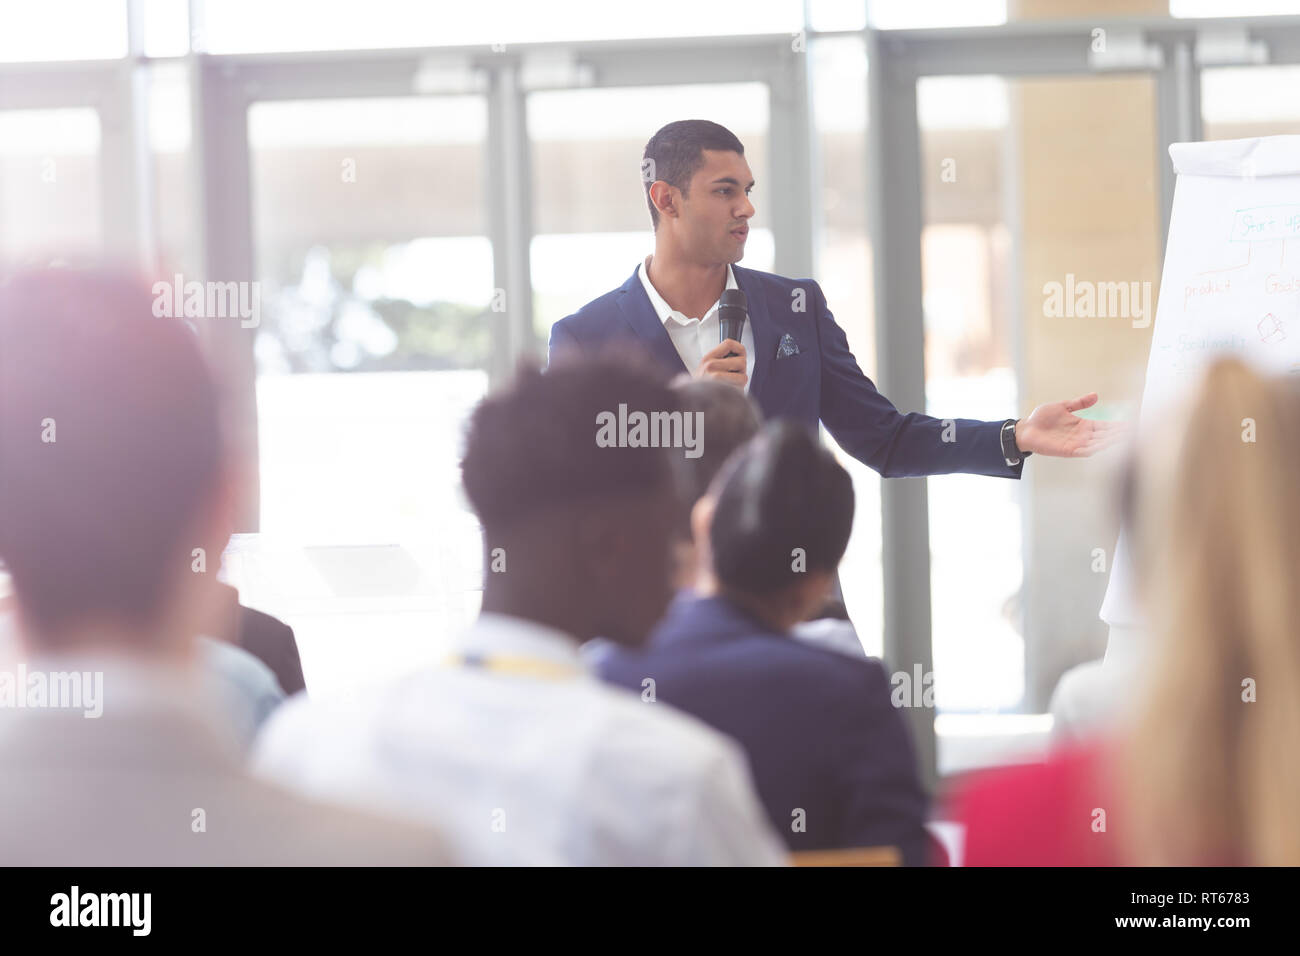 Businessman speaking in business seminar at conference Stock Photo